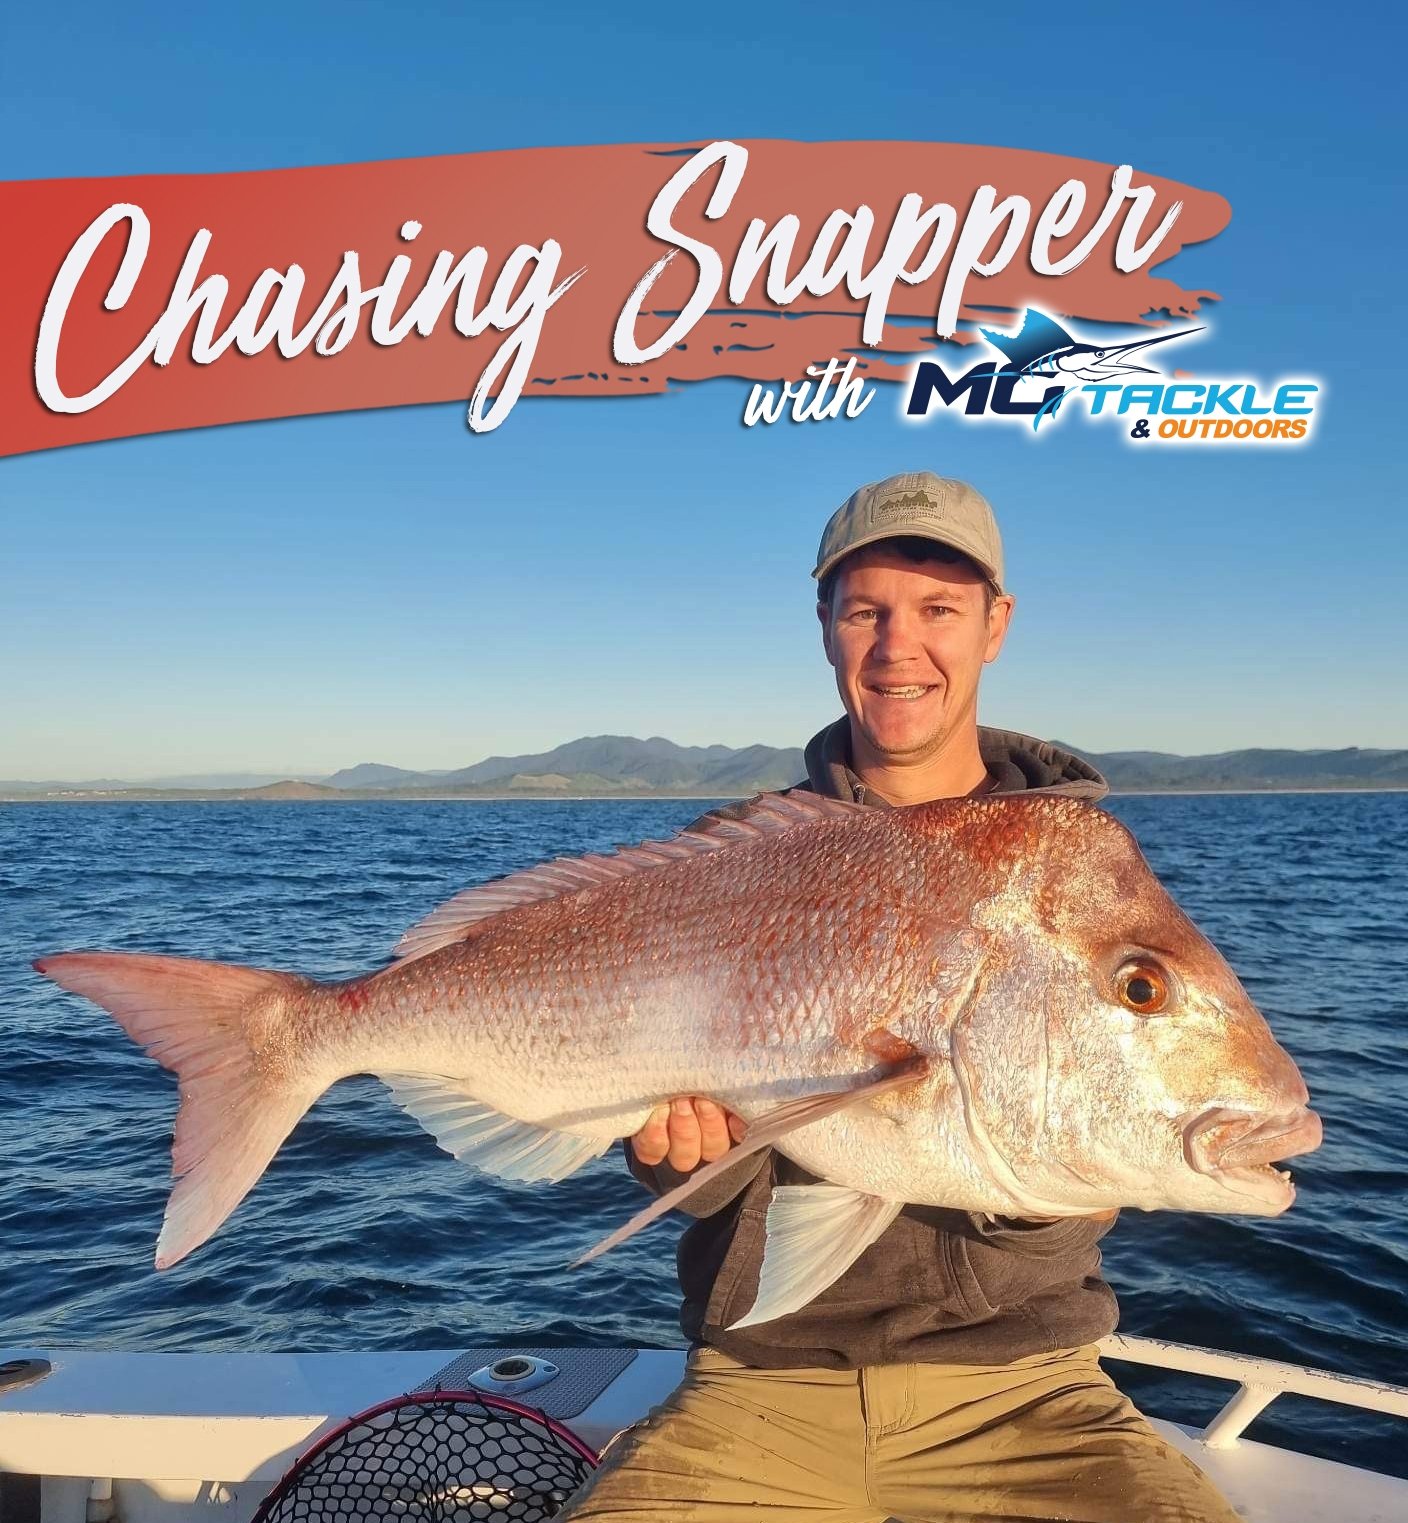 Chasing Snapper